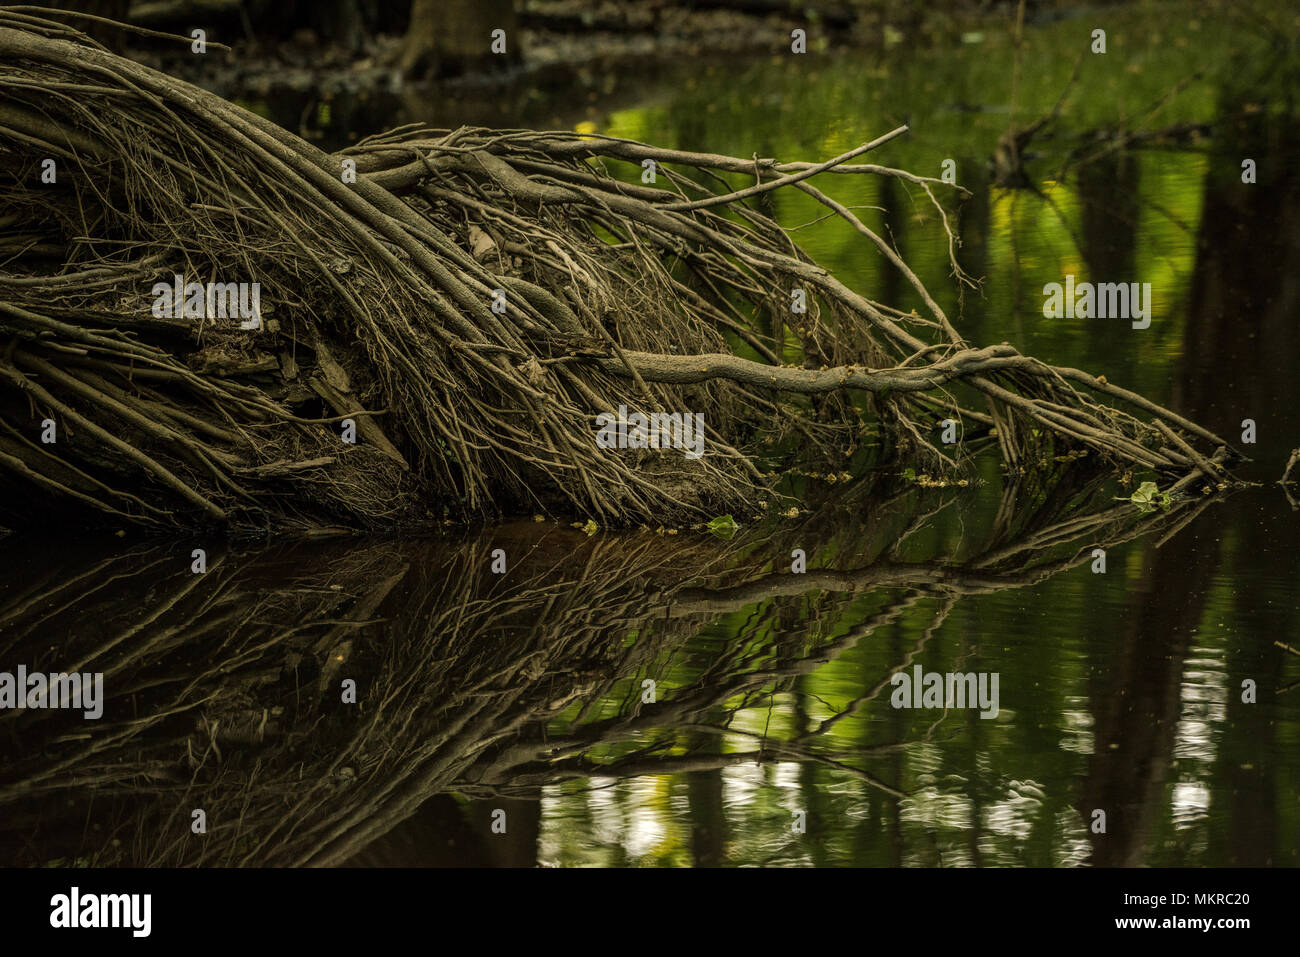 Roots growing horizontally over water, the still water reflects the roots. Stock Photo